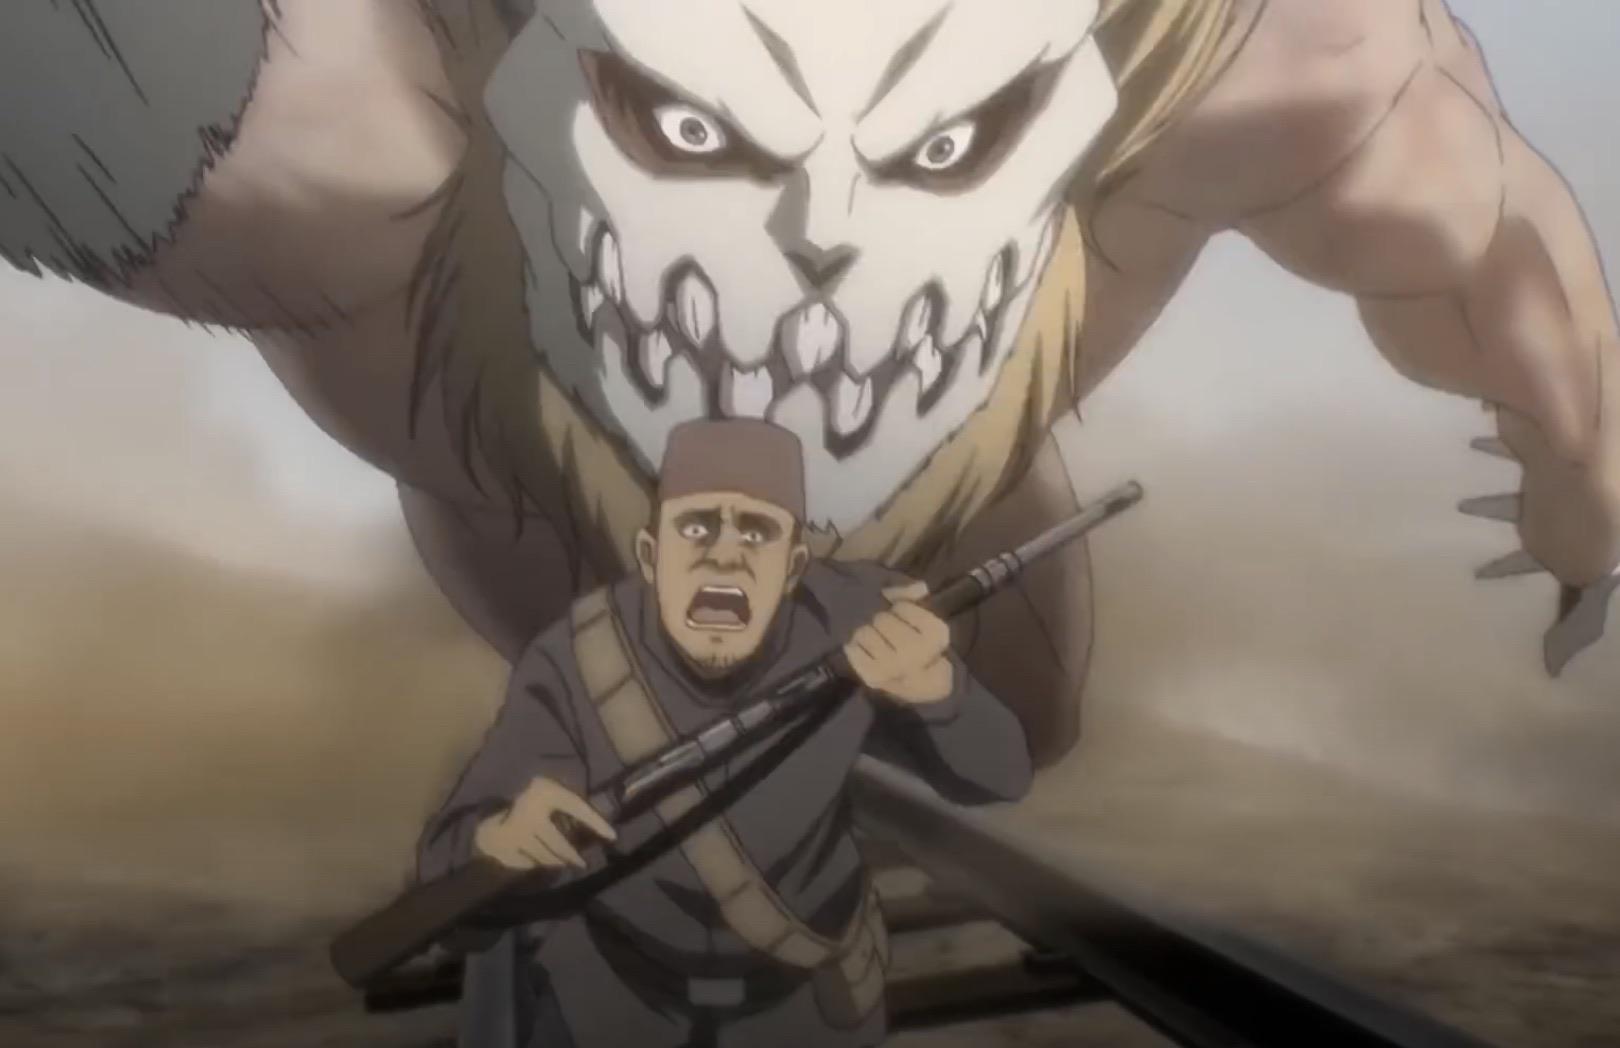 What The Attack On Titan Season 4 Trailer Hints At For The Show's Final